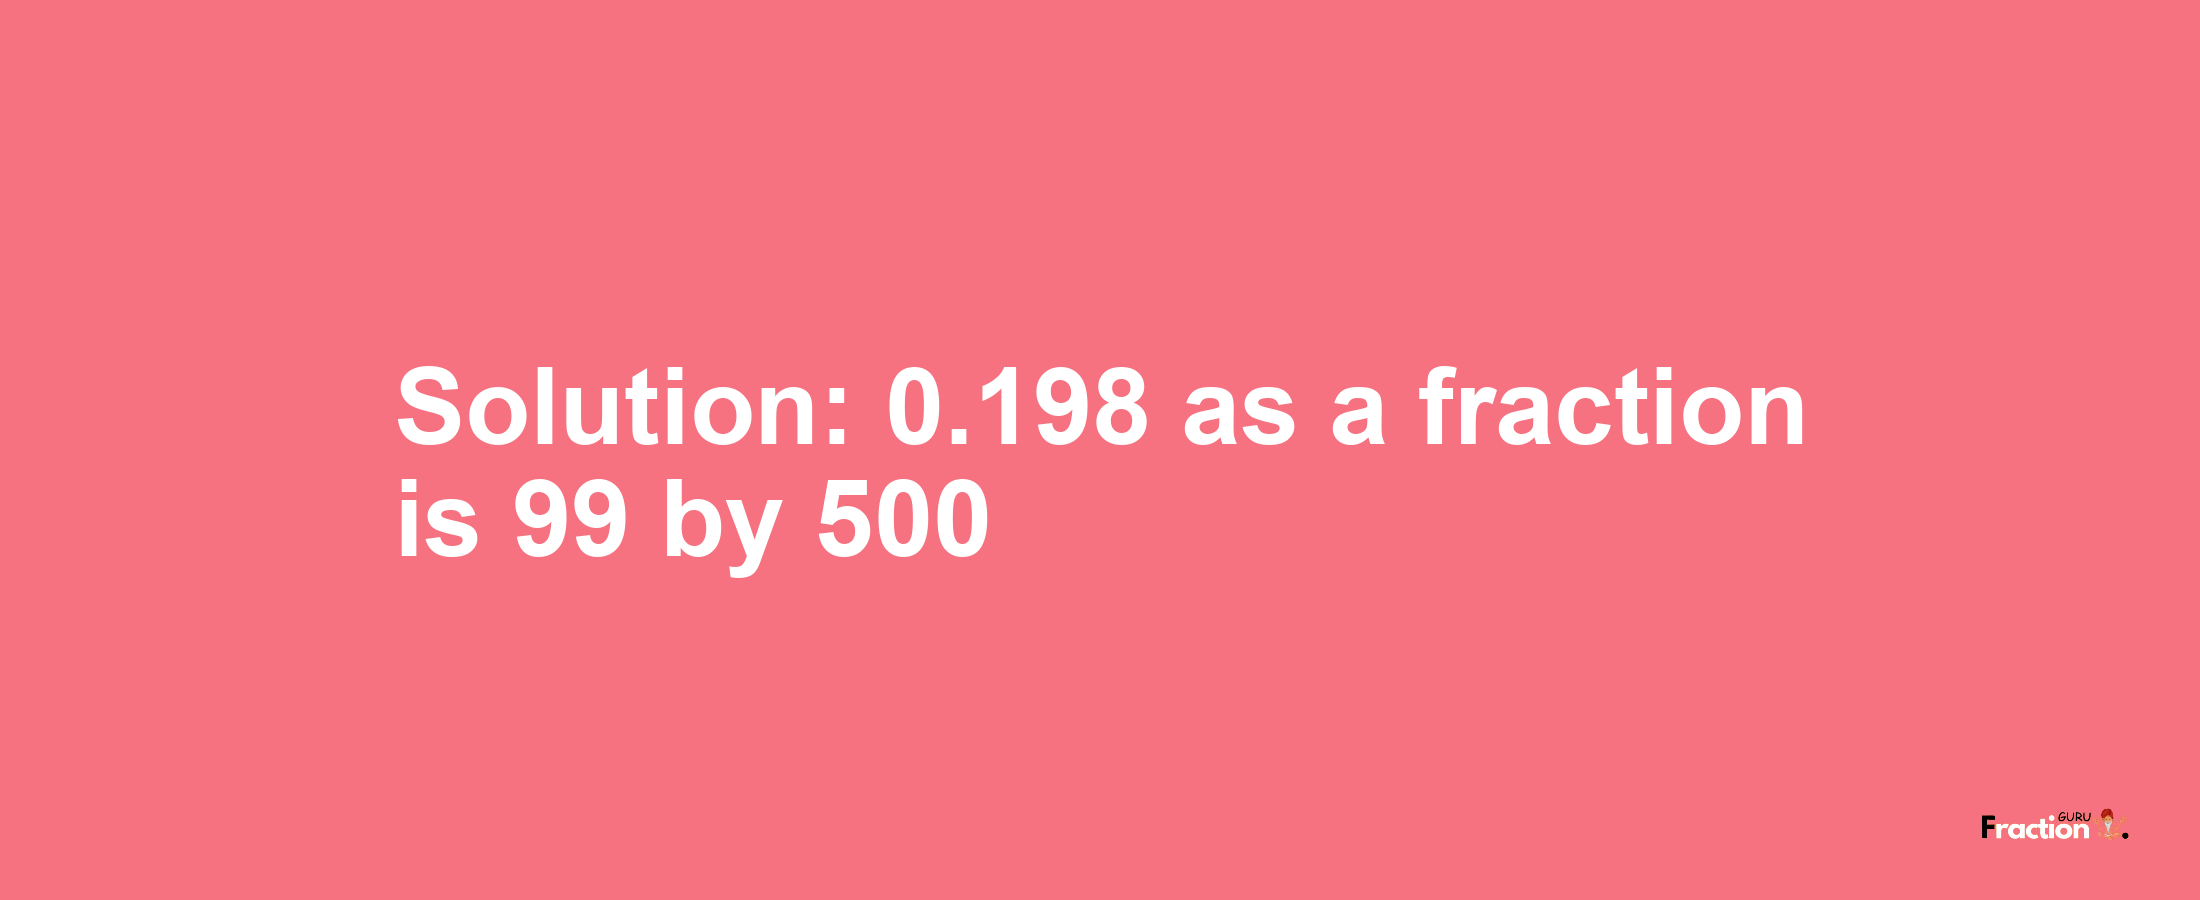 Solution:0.198 as a fraction is 99/500